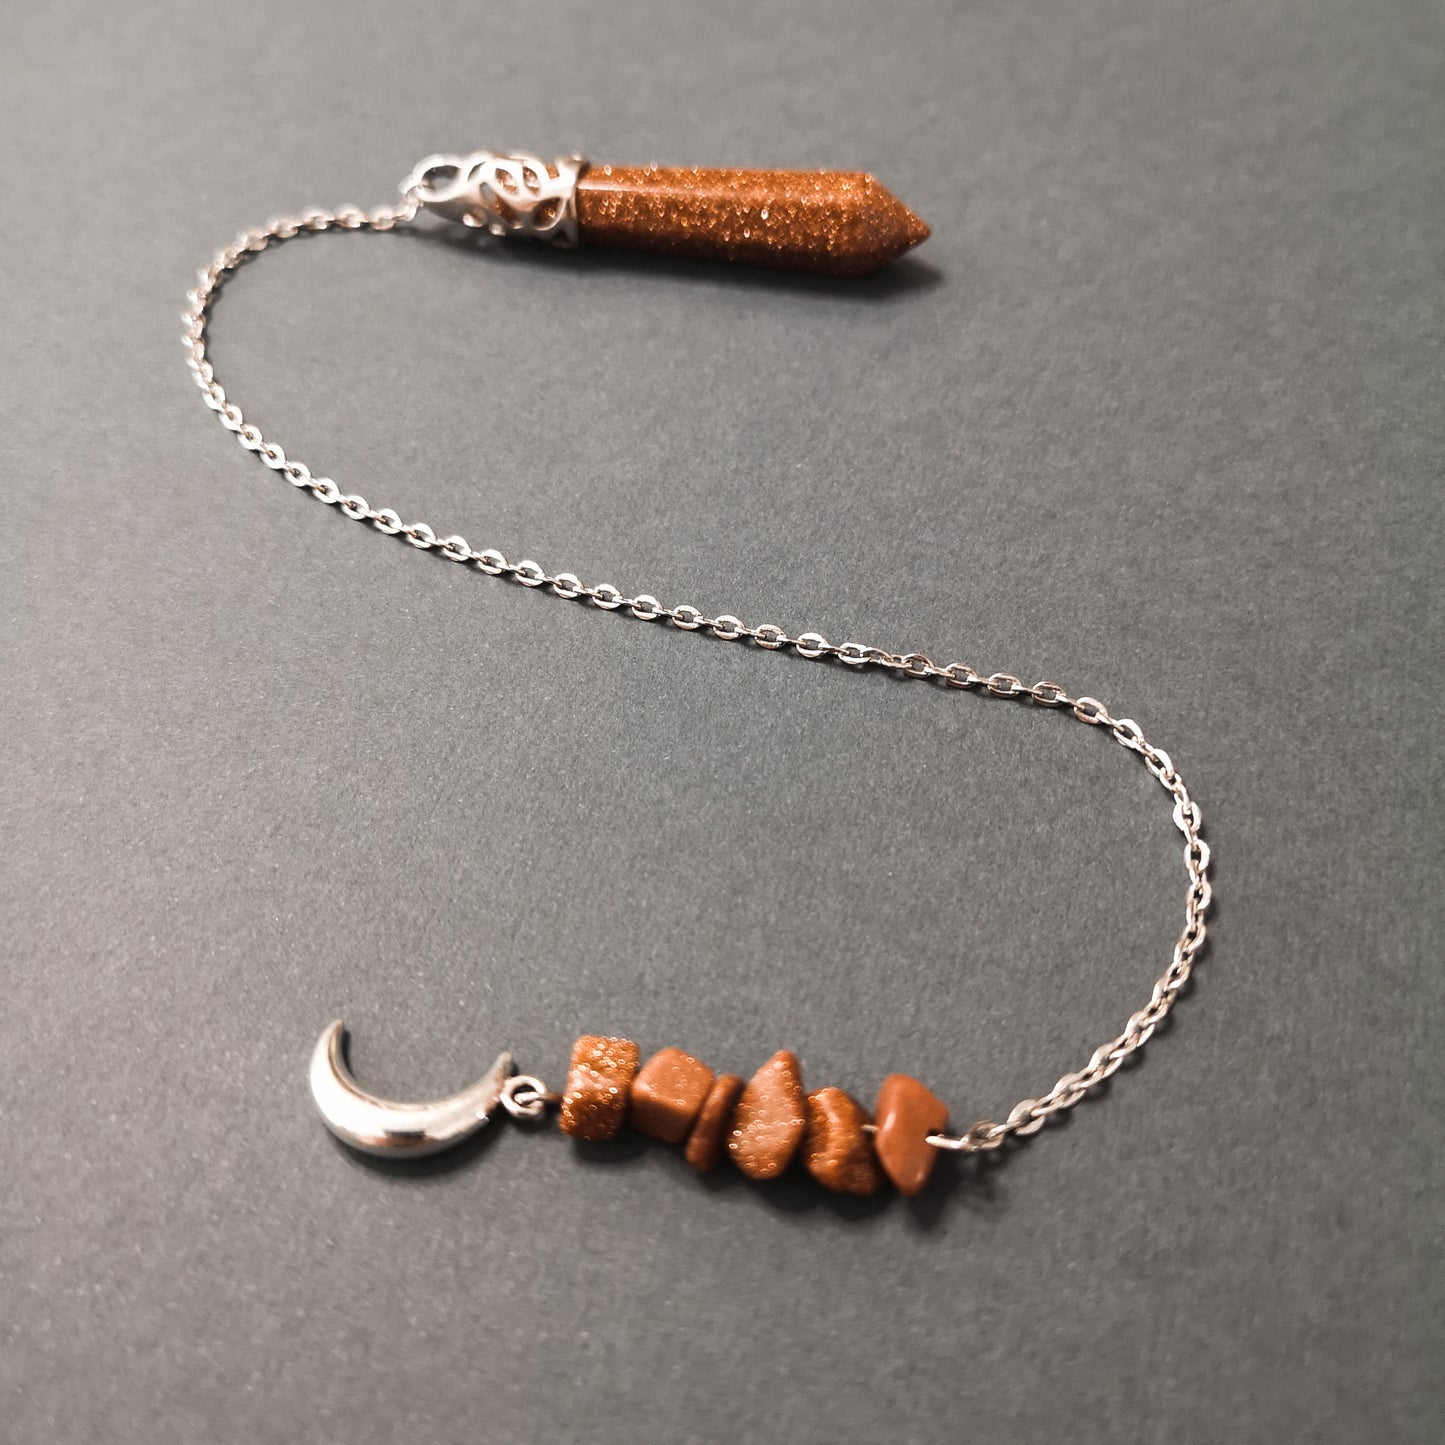 Goldstone pendulum with a crescent moon